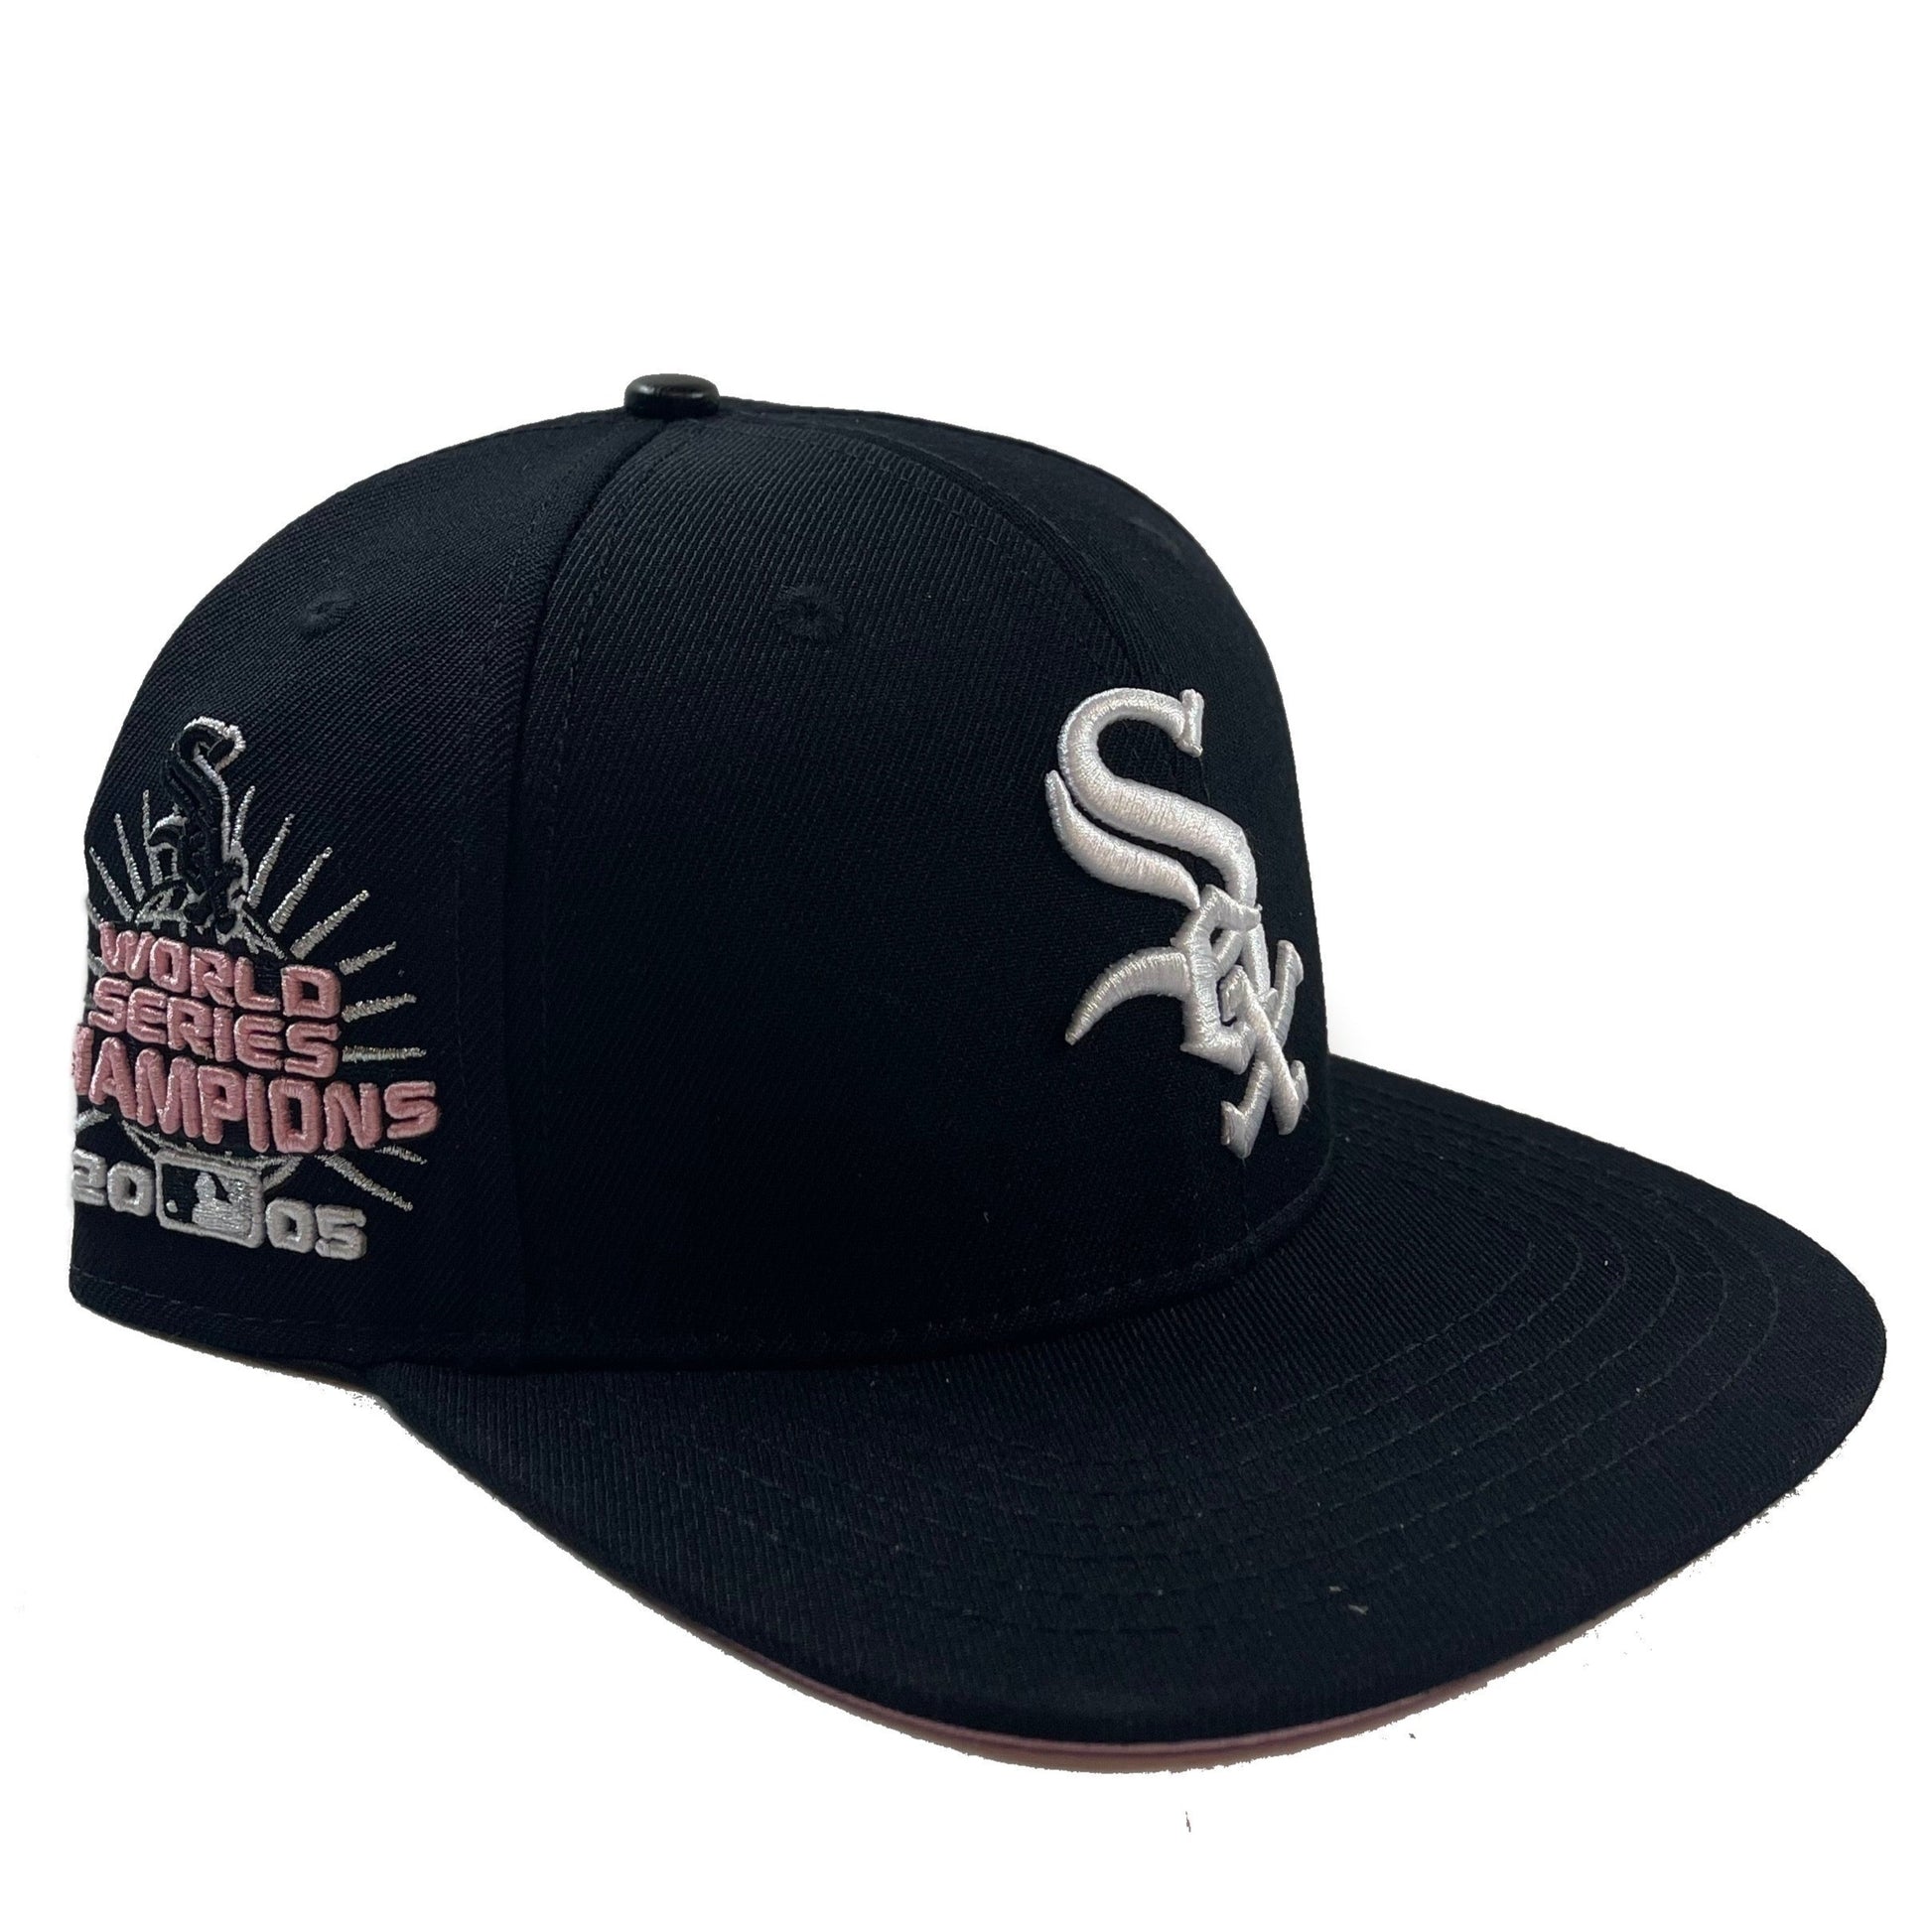 Chicago White Sox 2005 World Series Snapback by Pro Standard